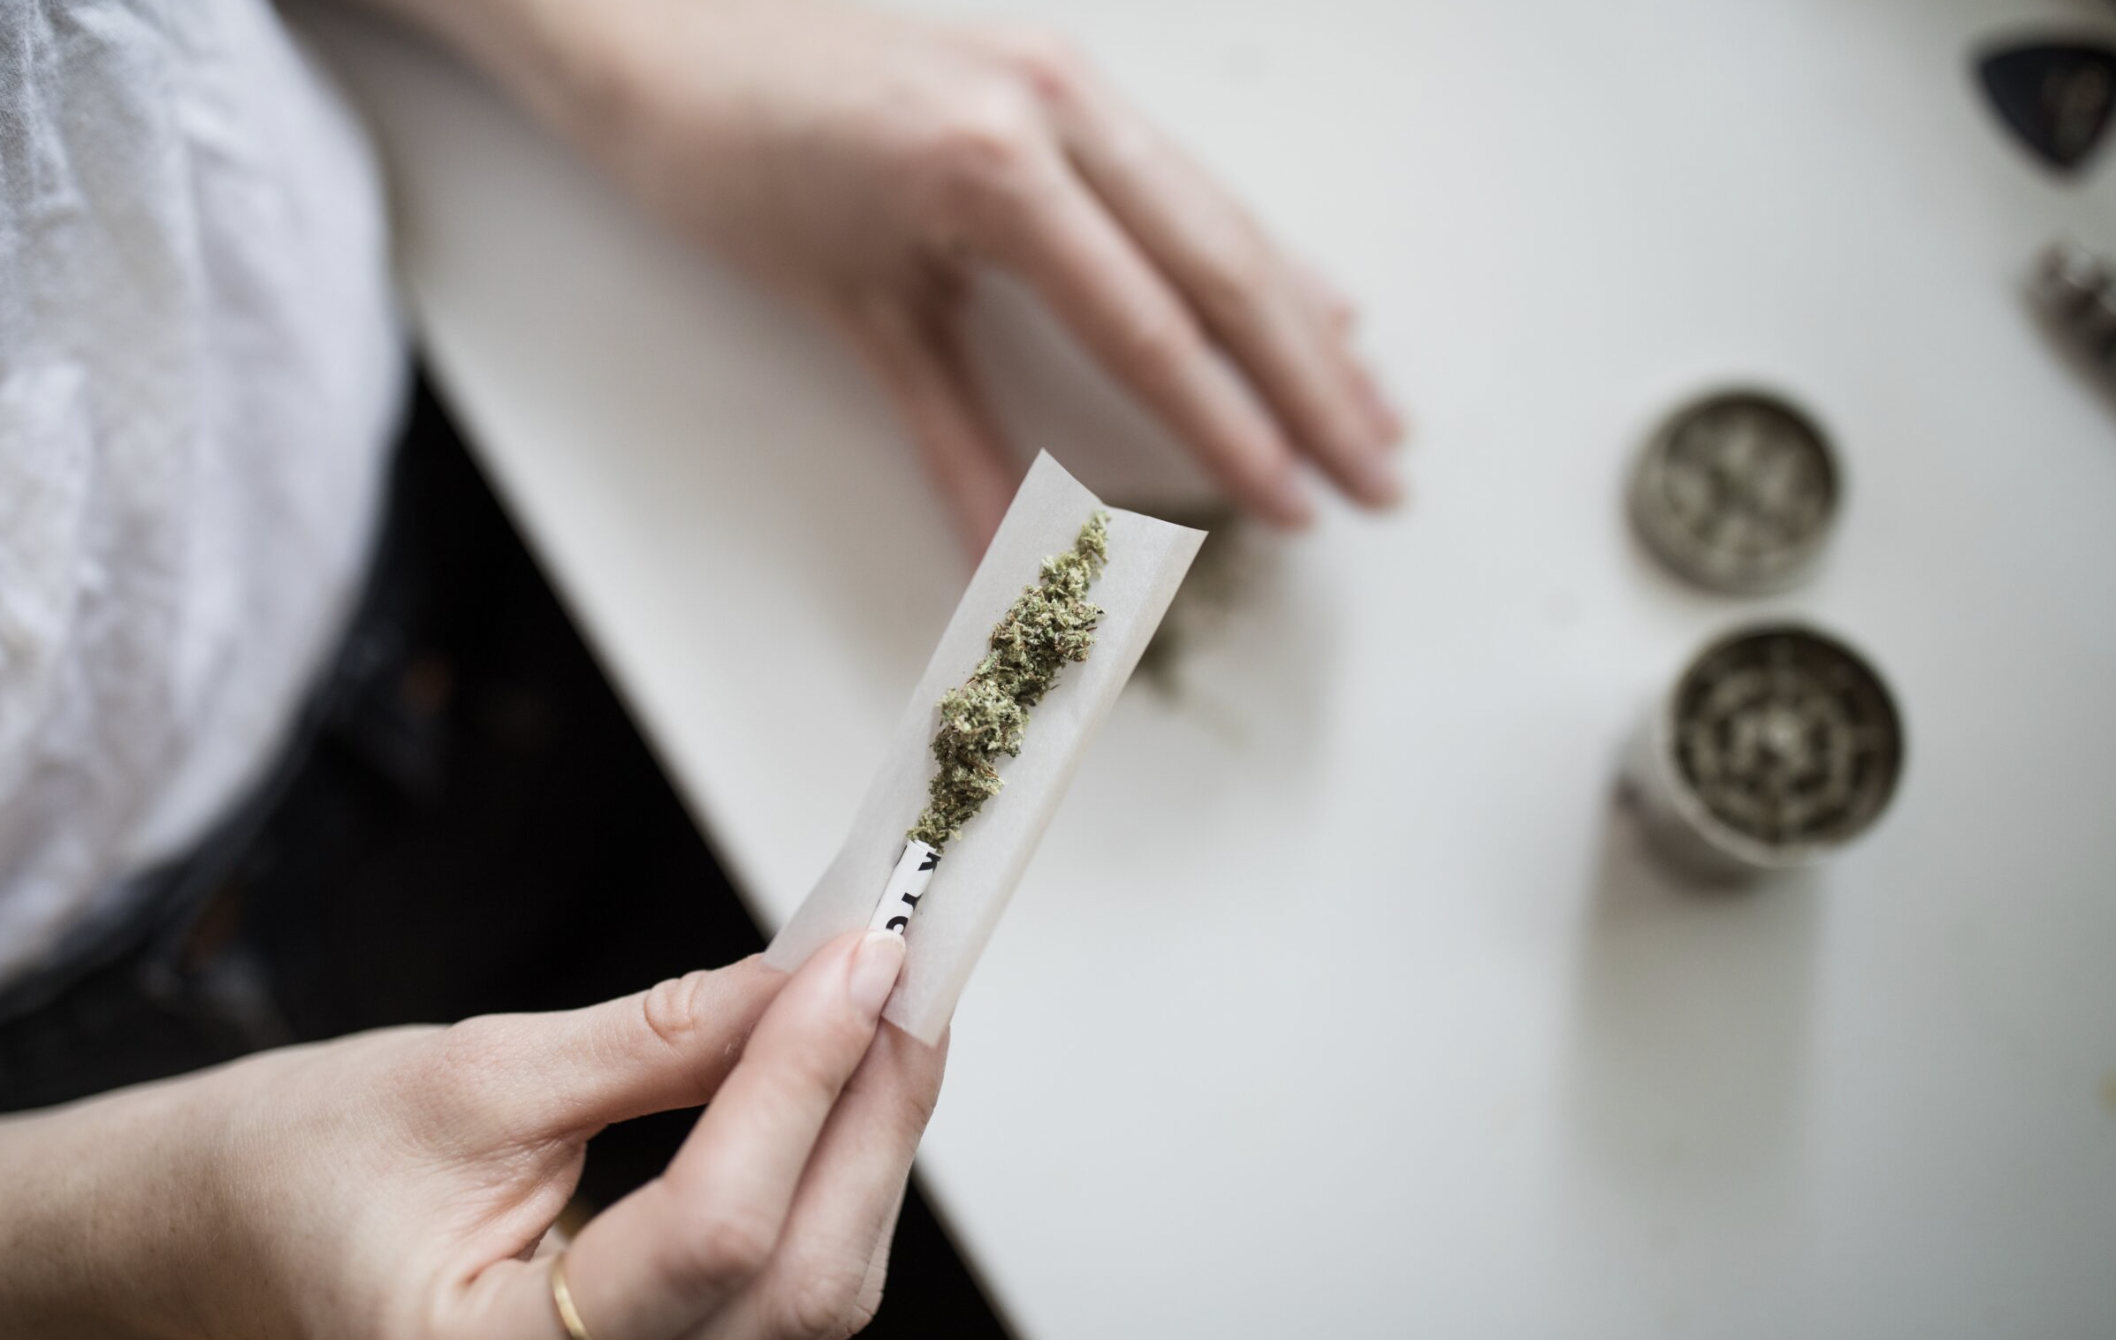 From Papers to Filters The Essential Tools and Materials for Rolling Joints